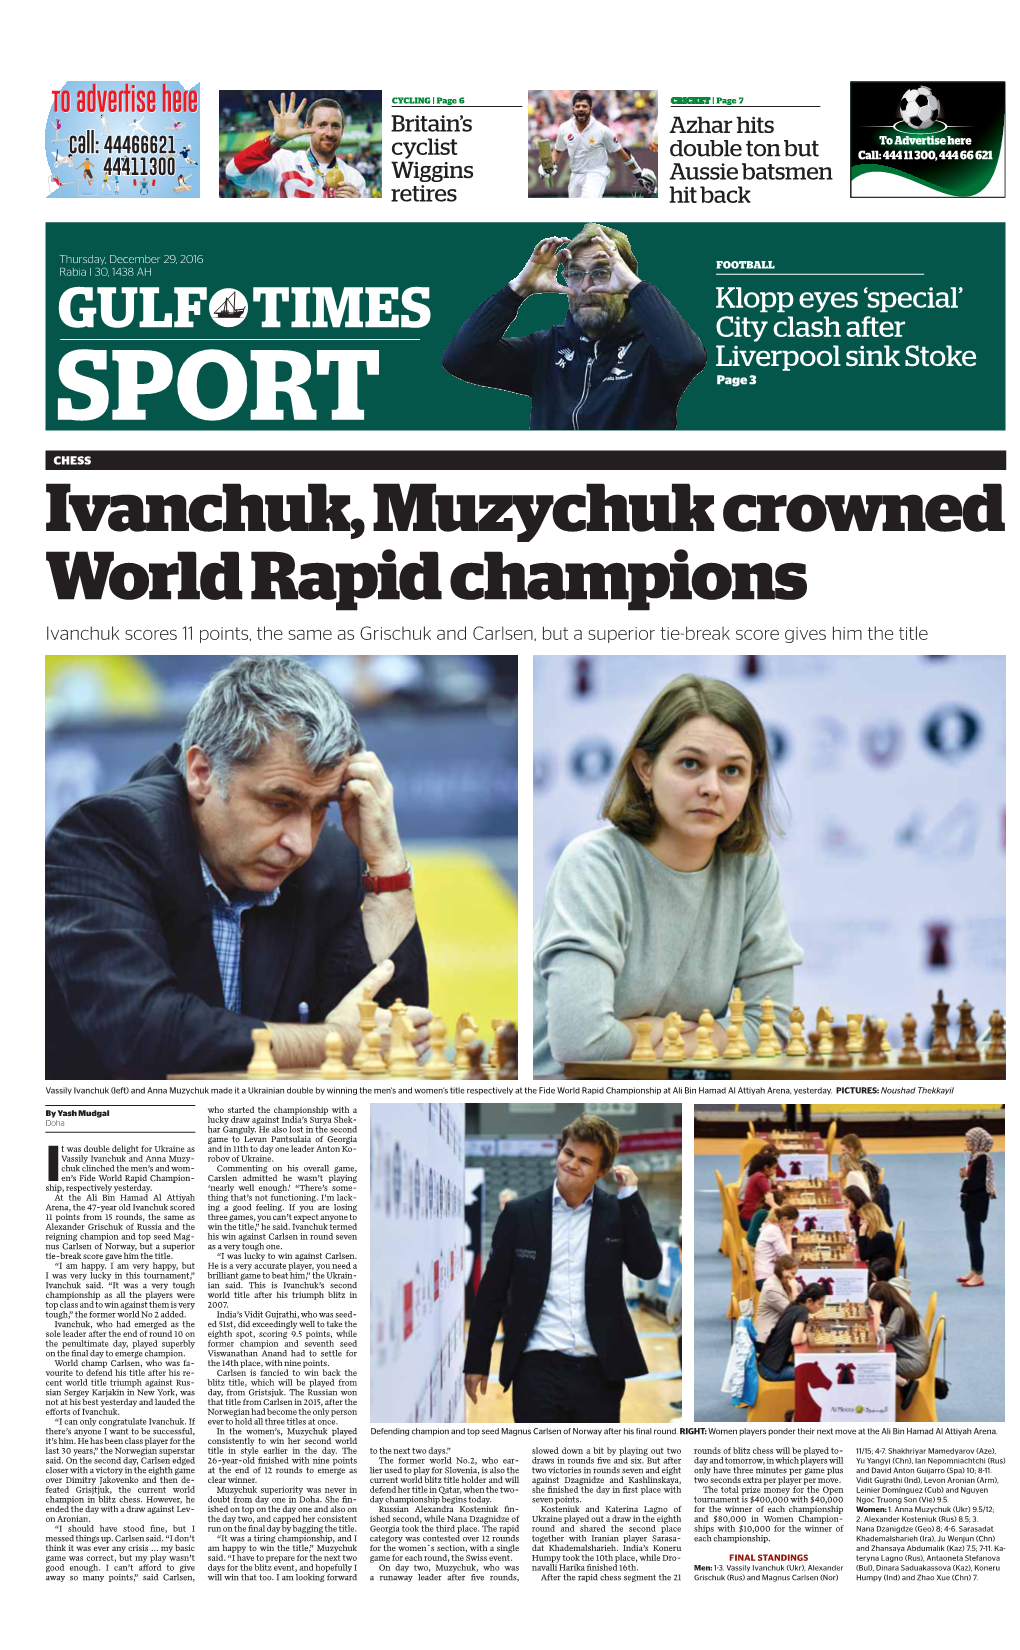 Ivanchuk, Muzychuk Crowned World Rapid Champions Ivanchuk Scores 11 Points, the Same As Grischuk and Carlsen, but a Superior Tie-Break Score Gives Him the Title